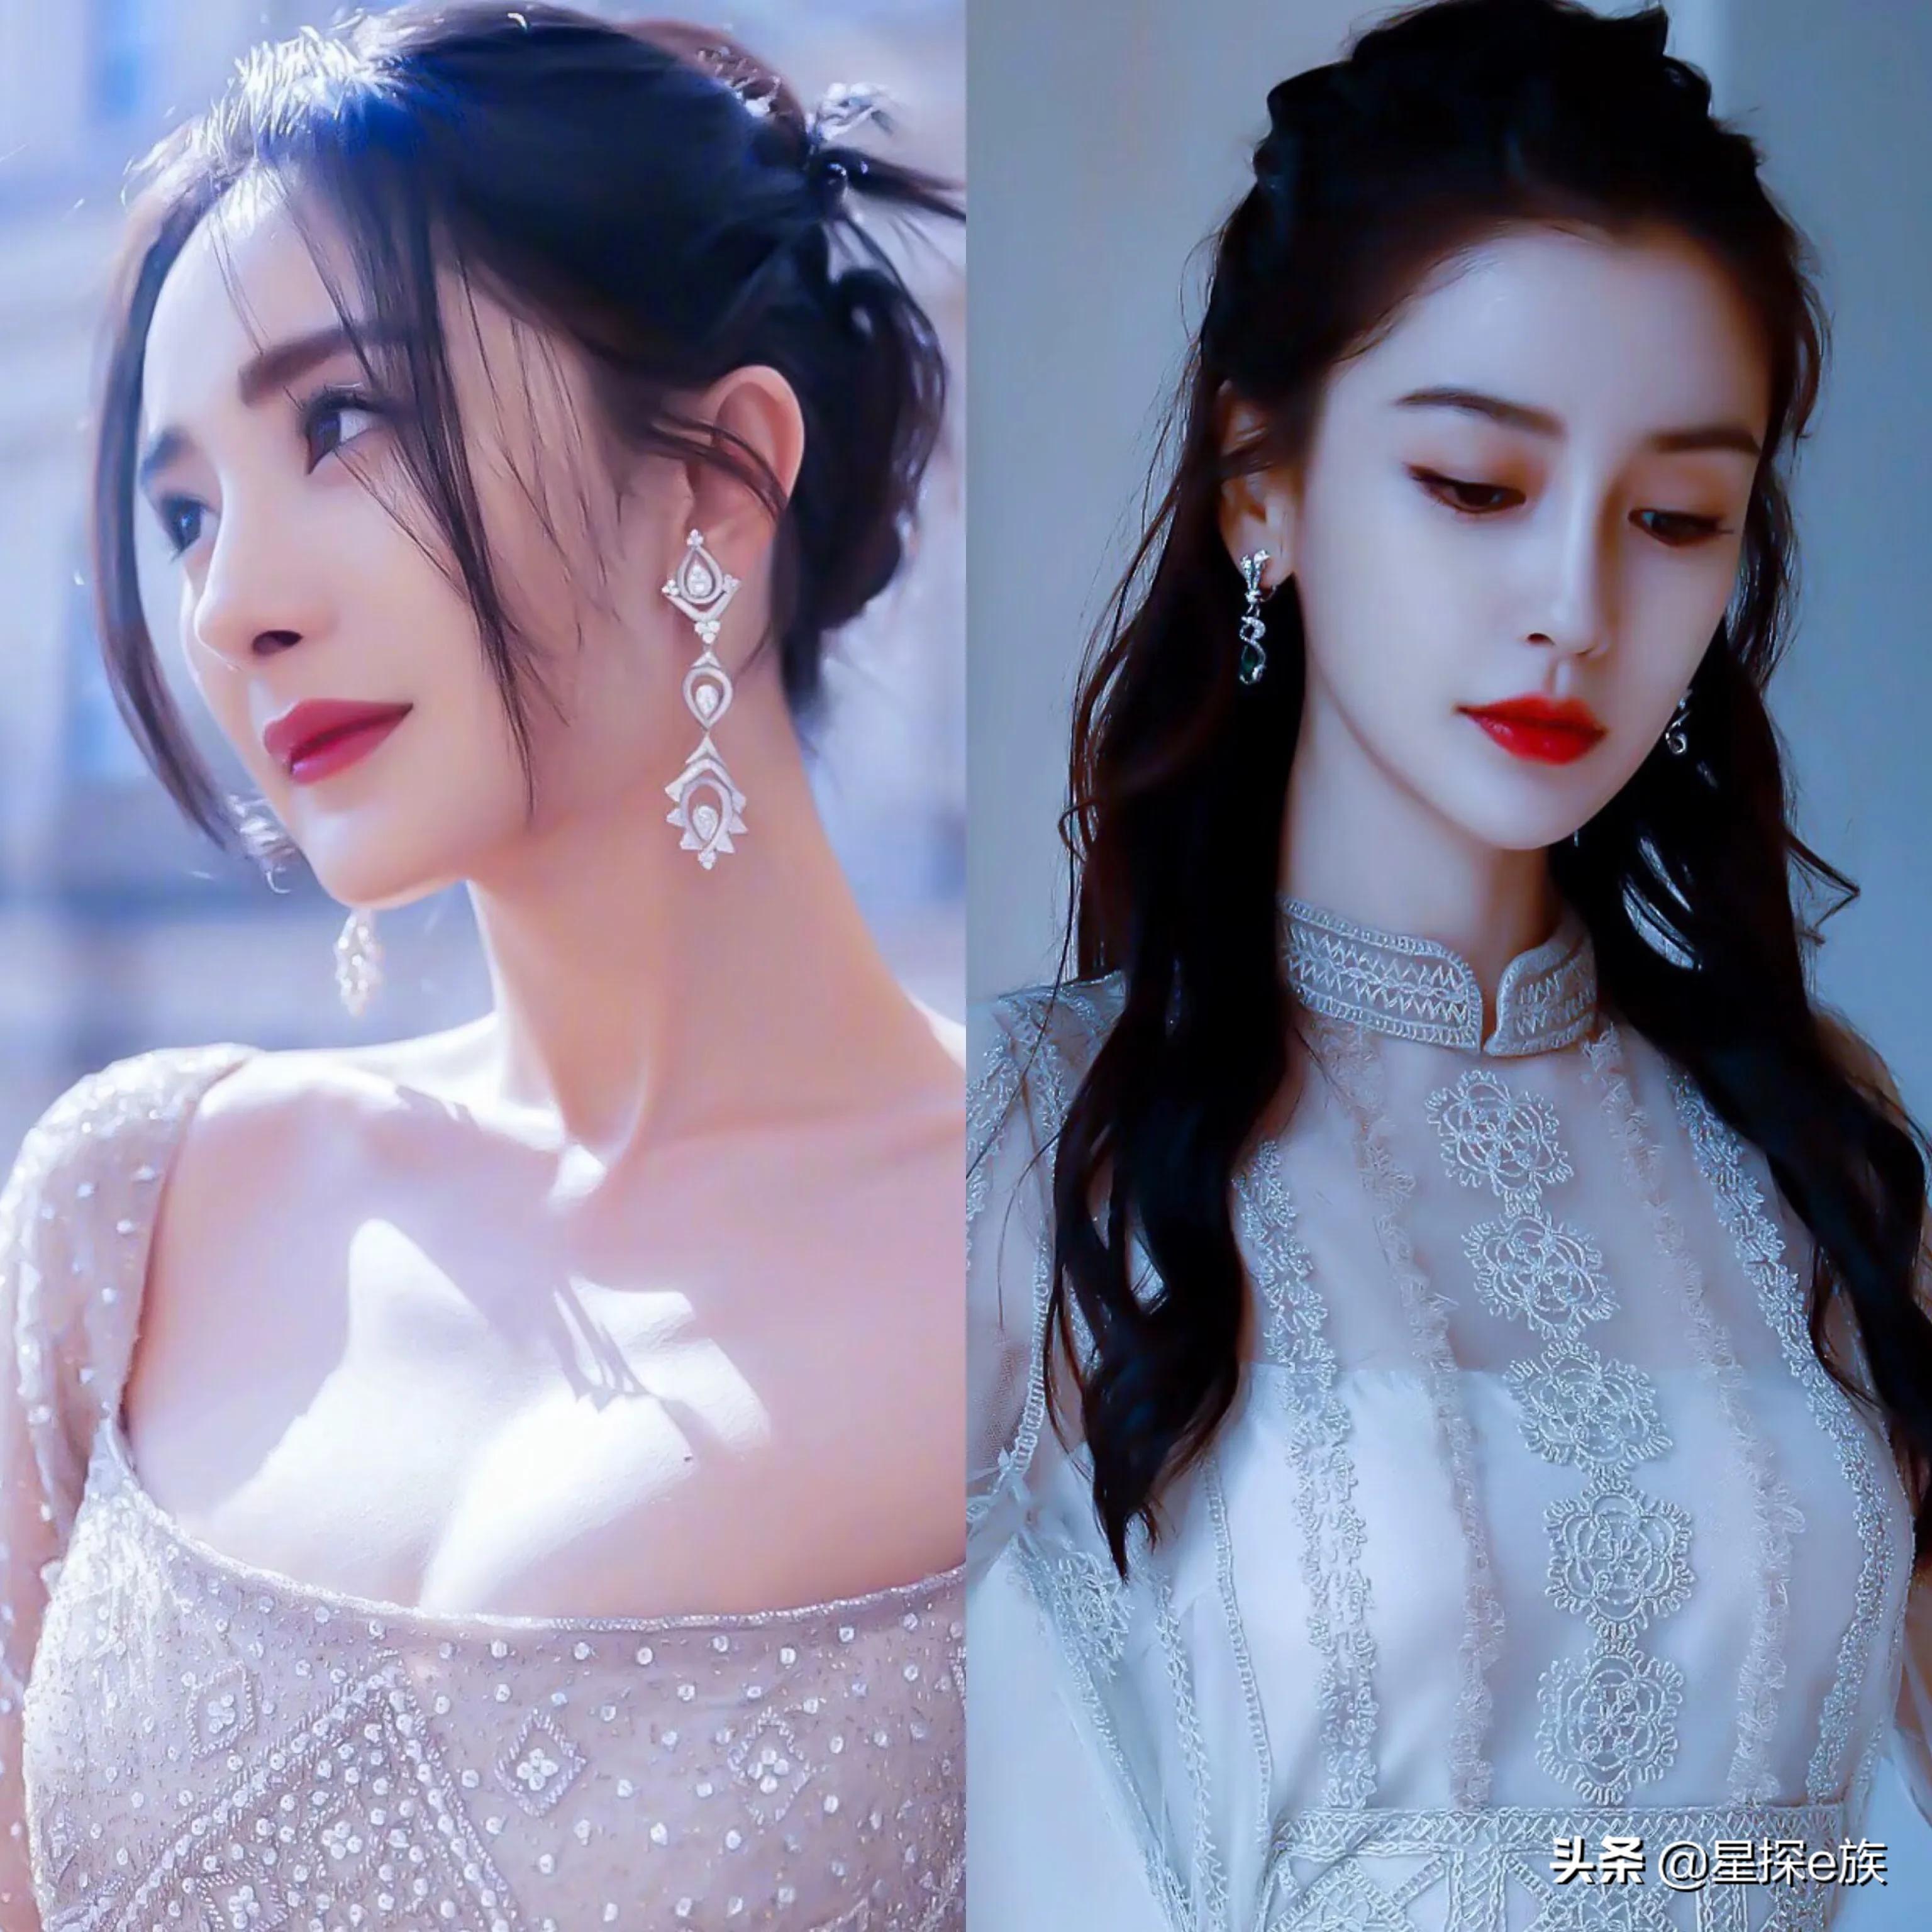 X 上的Bulgari：「Chinese actress and singer Ms.#YangMi spotted